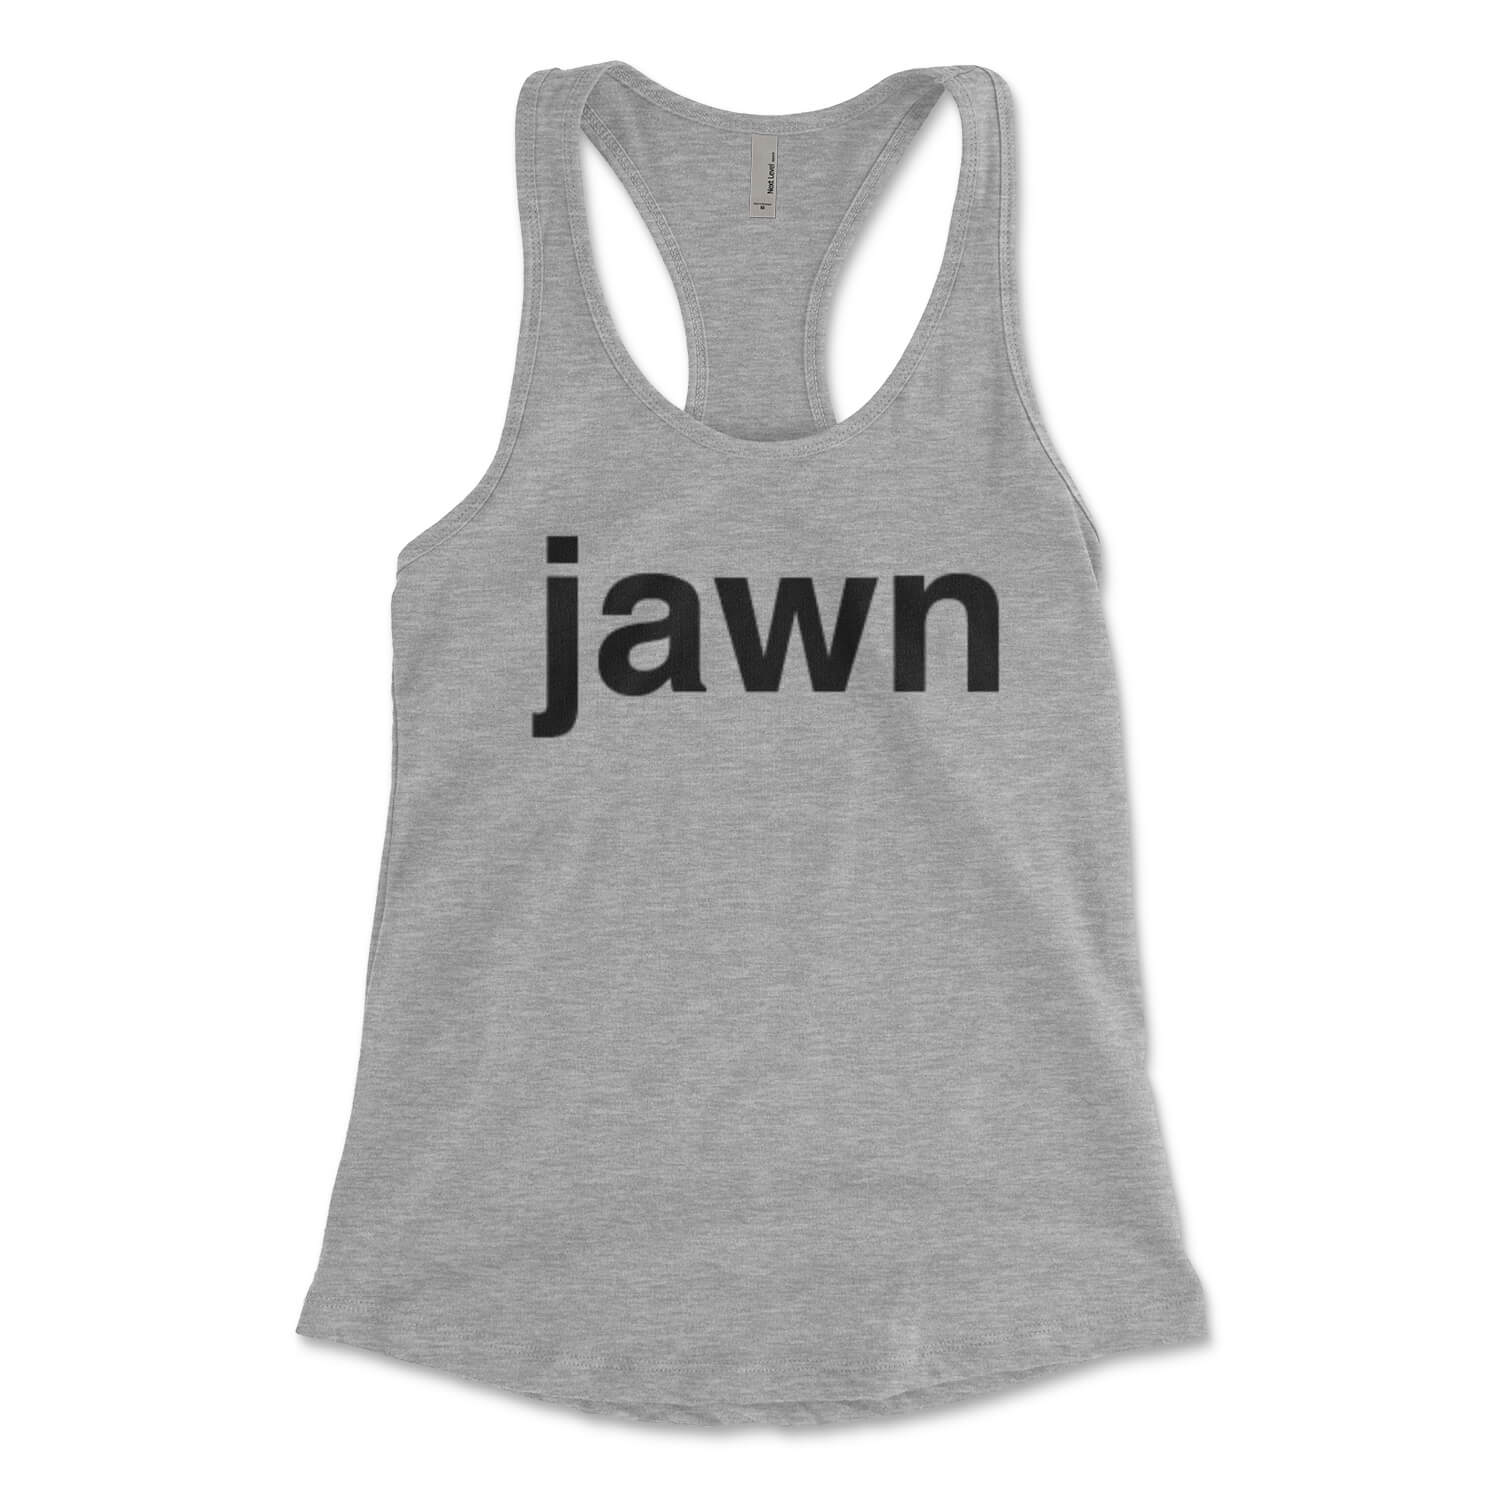 Jawn It's A Philly Thing Philadelphia t-shirt, hoodie, sweater, long sleeve  and tank top